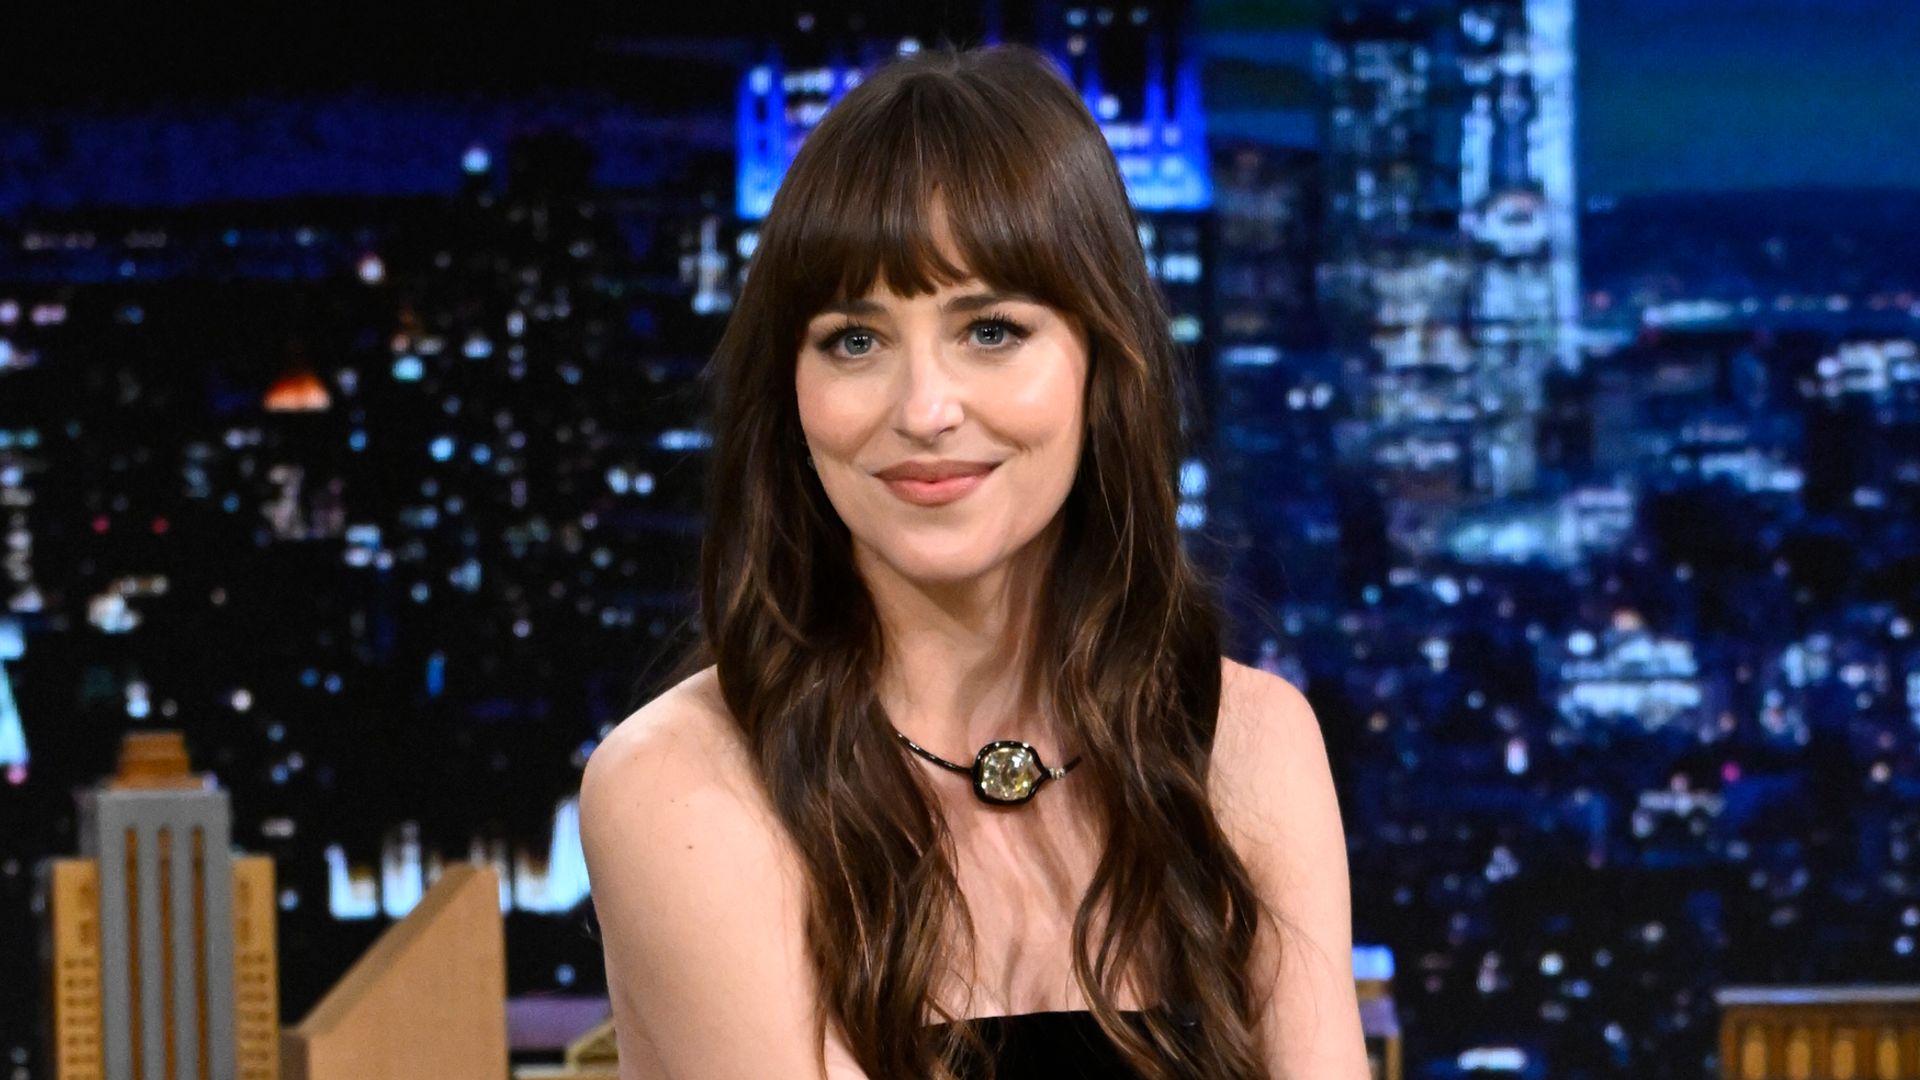 THE TONIGHT SHOW STARRING JIMMY FALLON -- Episode 1906 -- Pictured: Actress Dakota Johnson during an interview on Monday, January 22, 2024 -- (Photo by: Todd Owyoung/NBC via Getty Images)